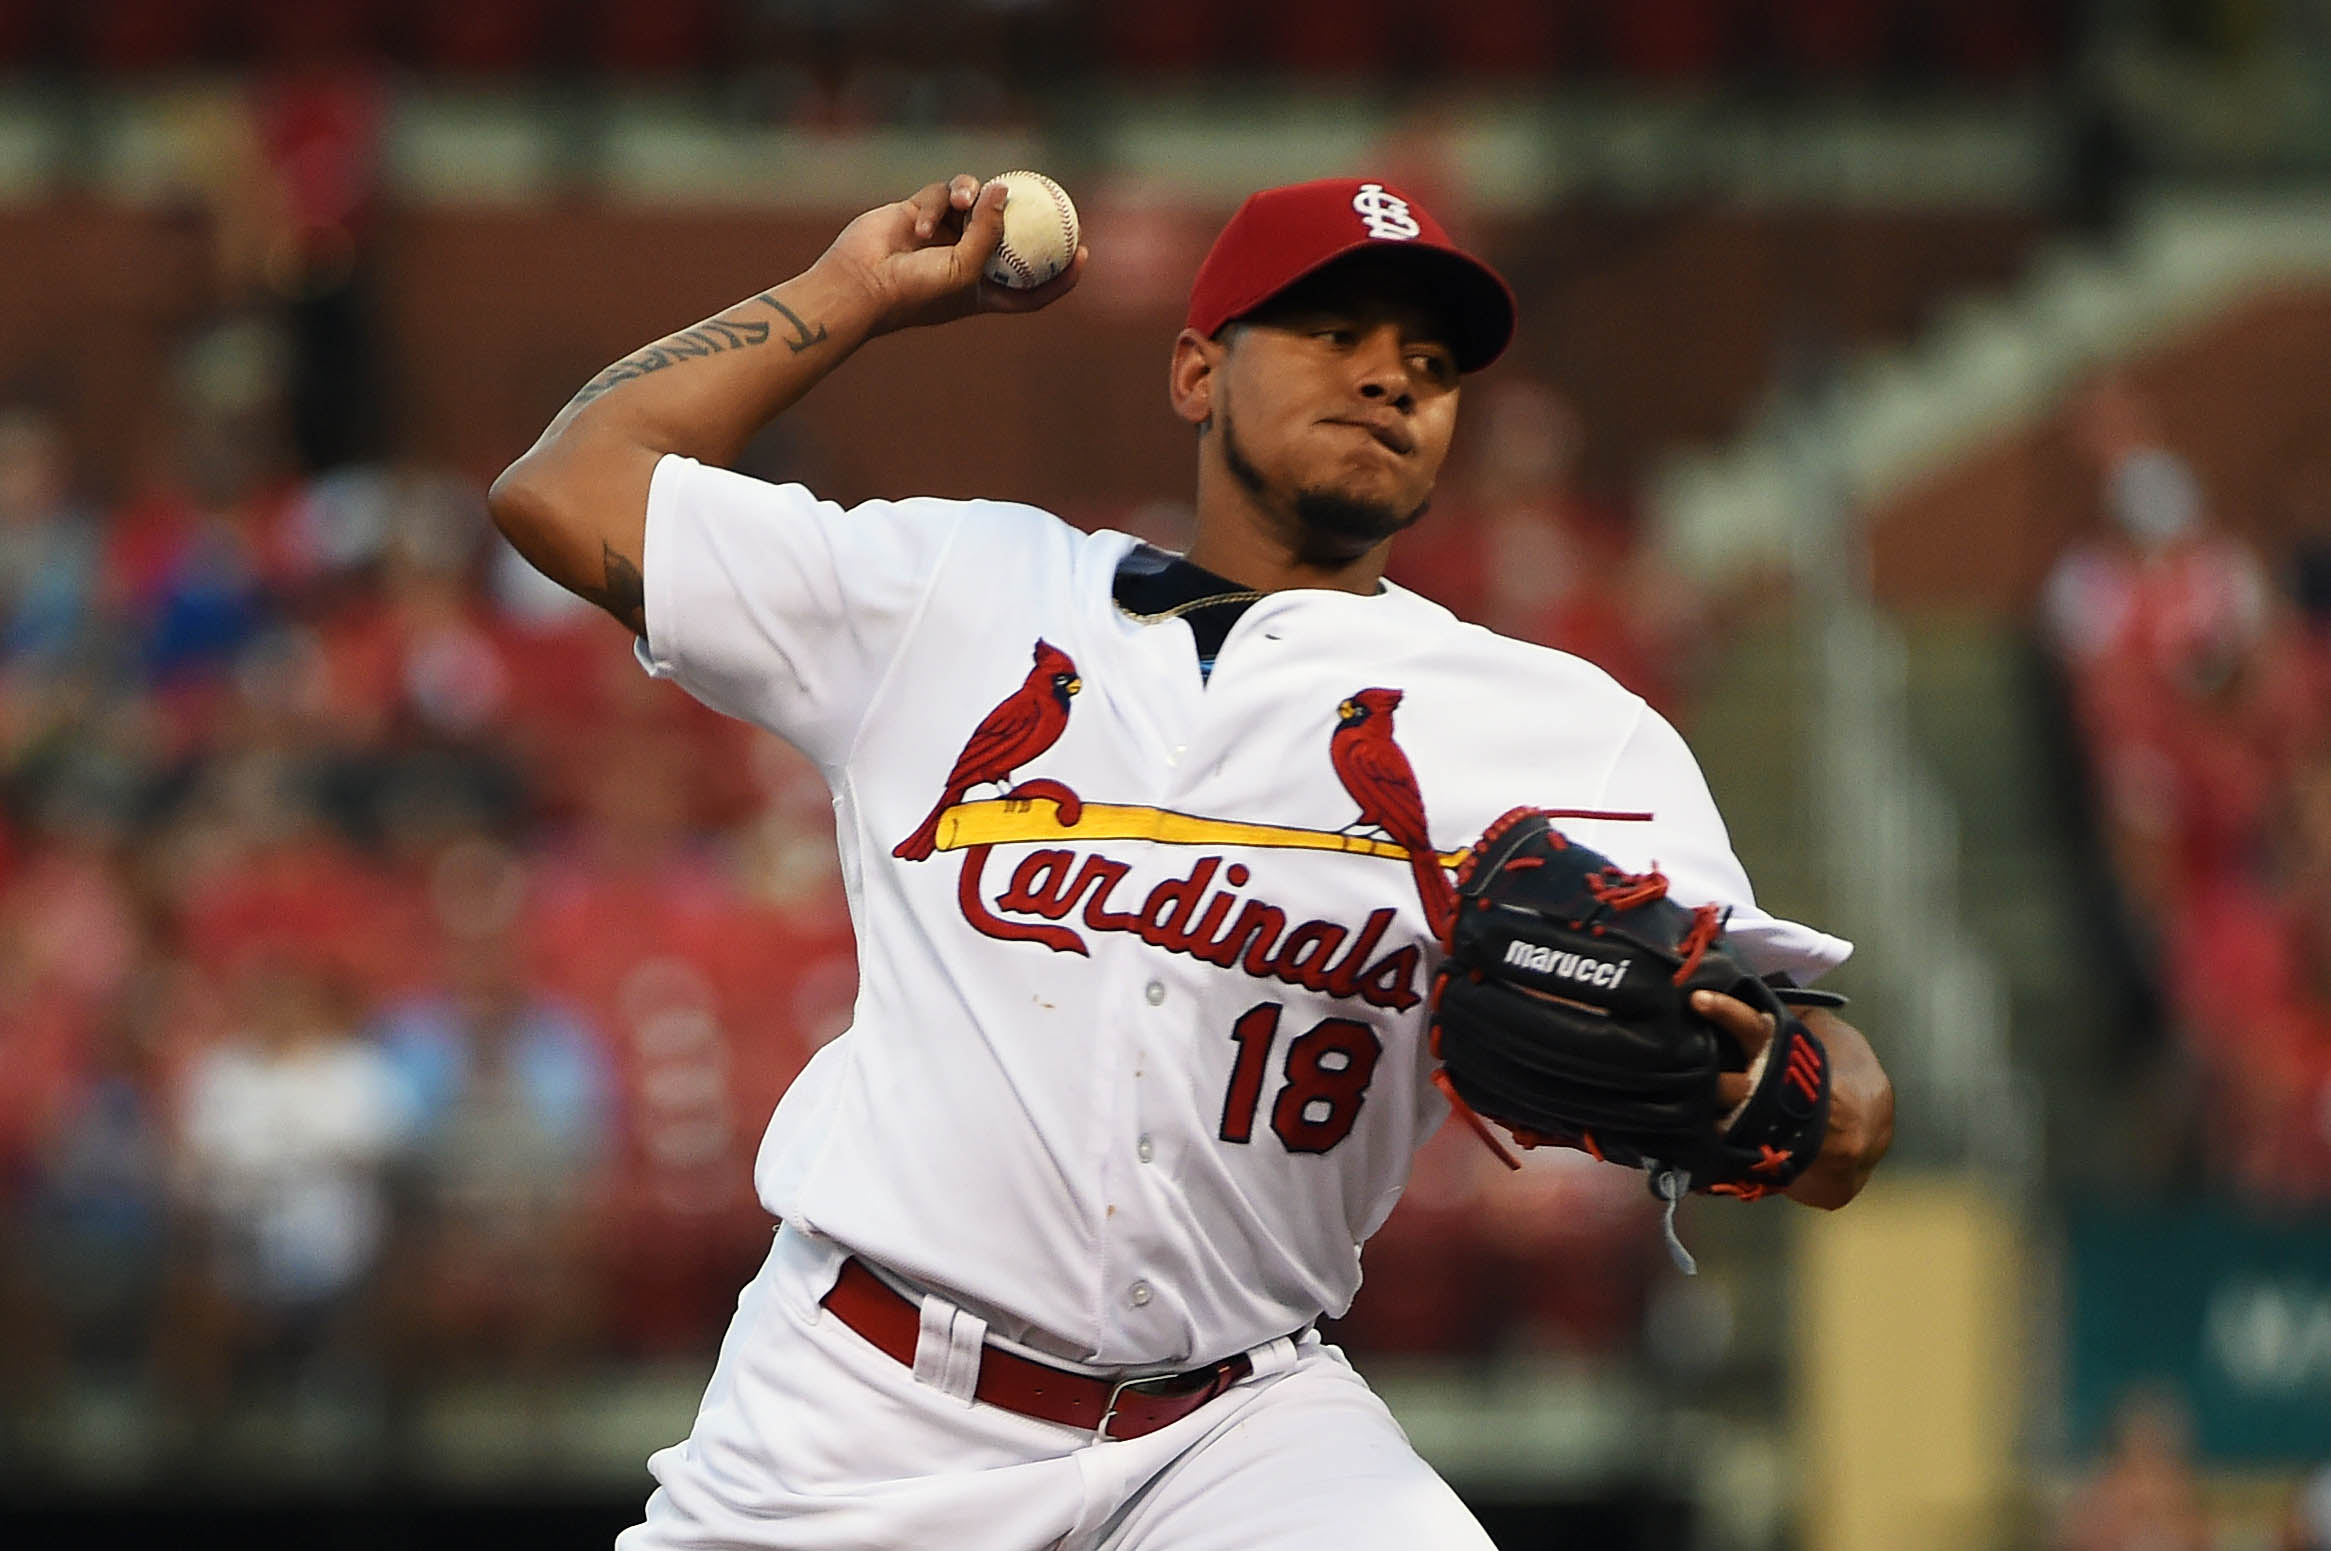 Despite 9 strikeouts, Carlos Martinez allowed four runs in 6 innings of work on Wednesday afternoon.